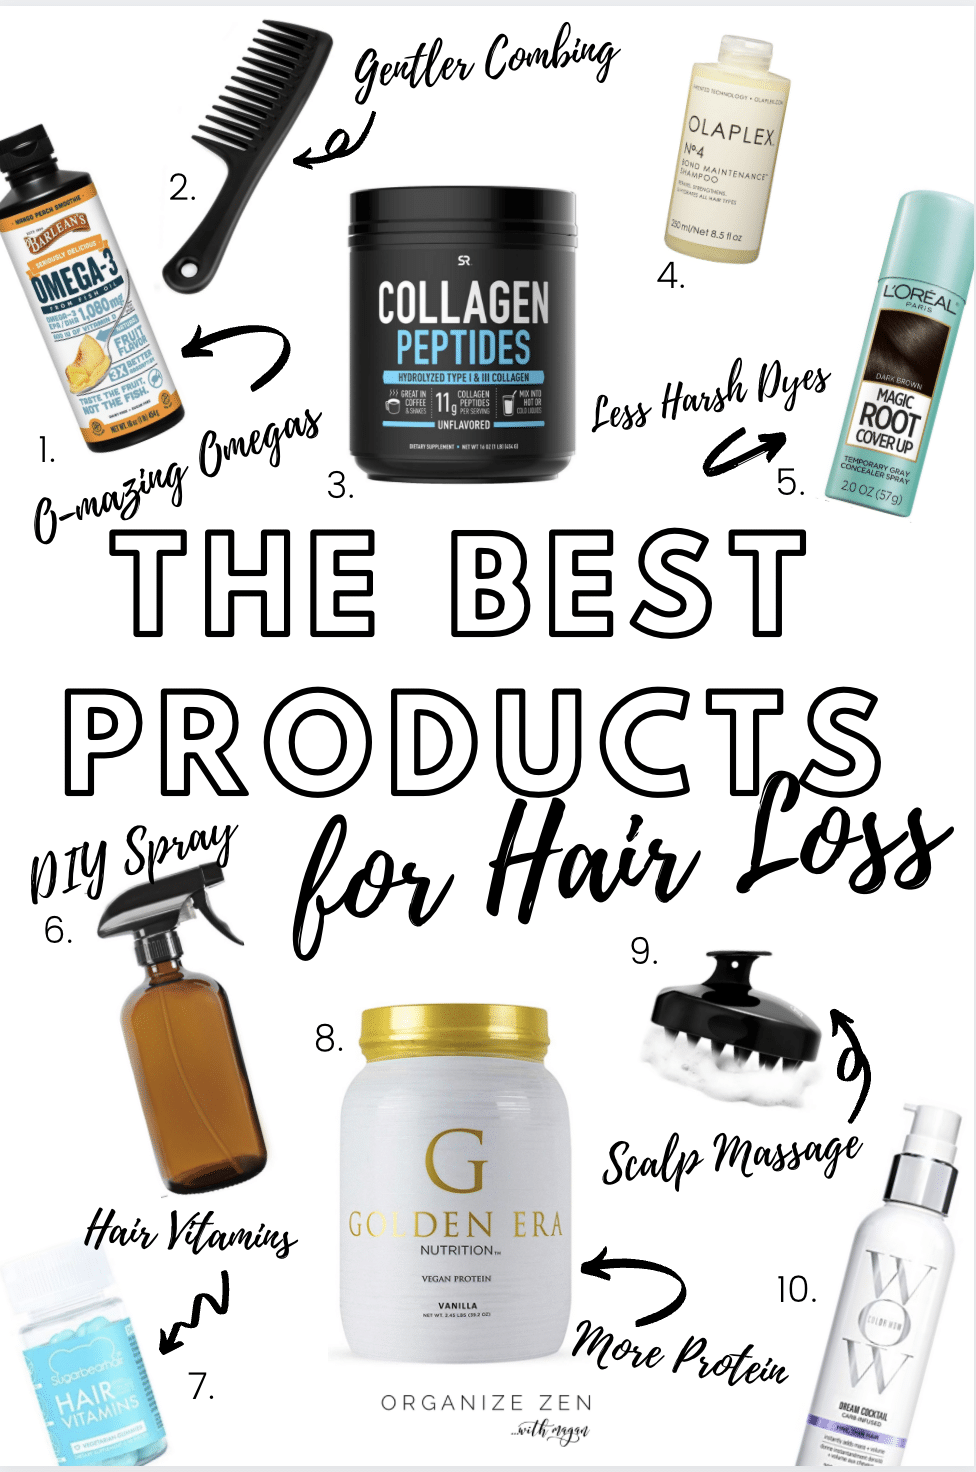 The Best Hair Loss Products